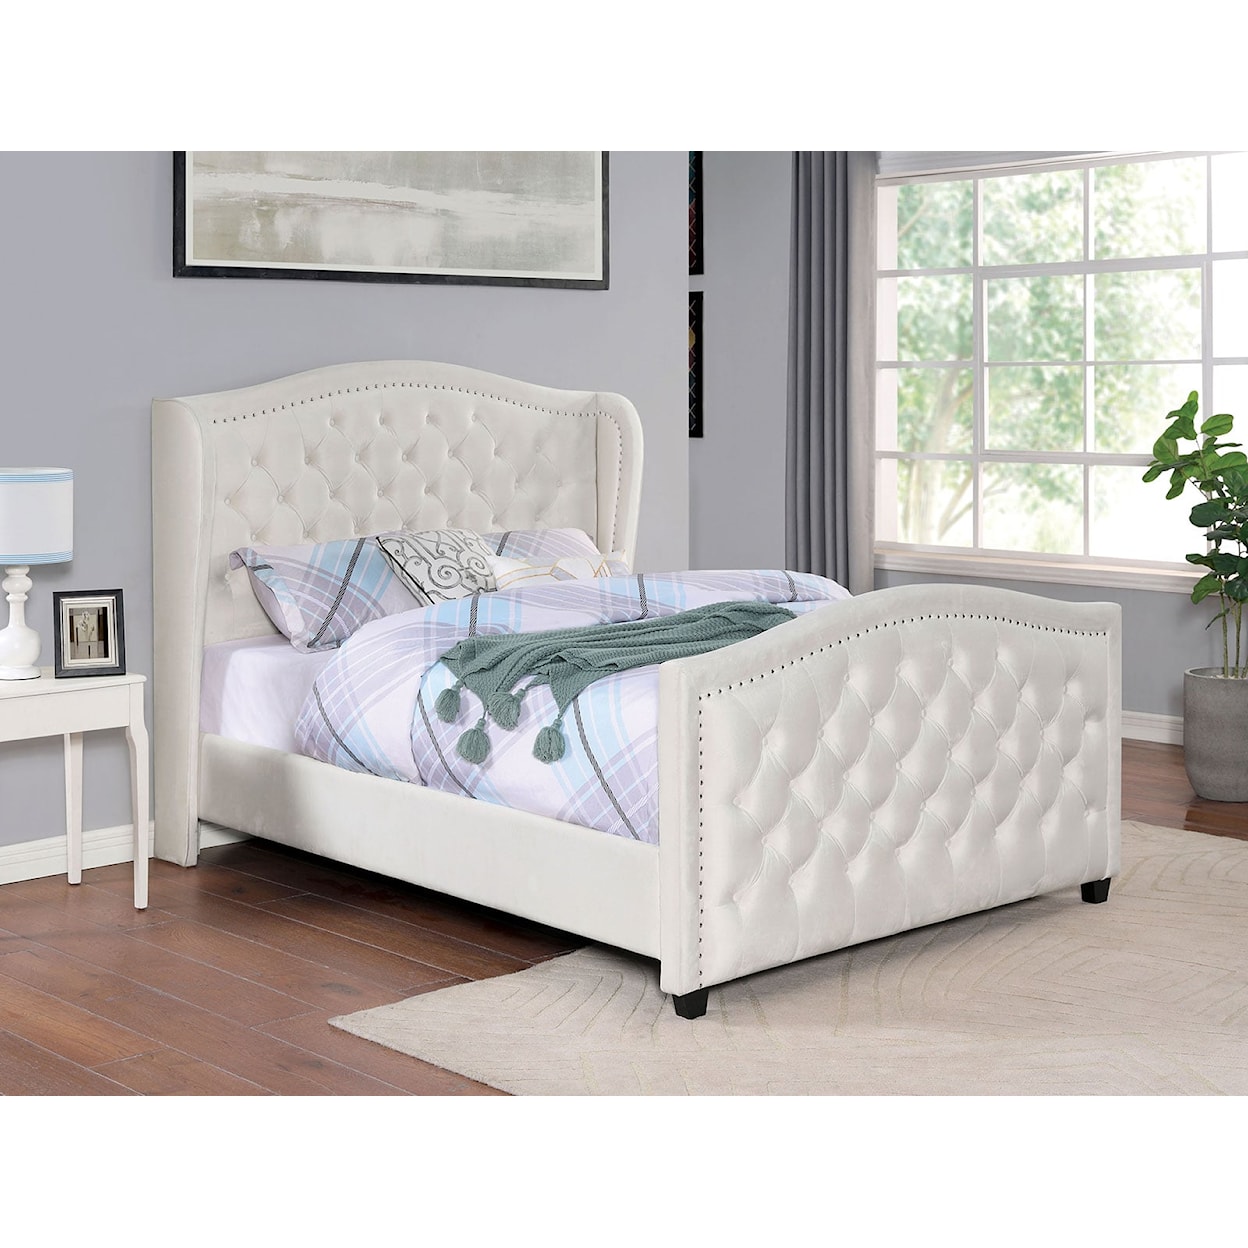 Furniture of America Kerran Upholstered Queen Bed with Button Tufting